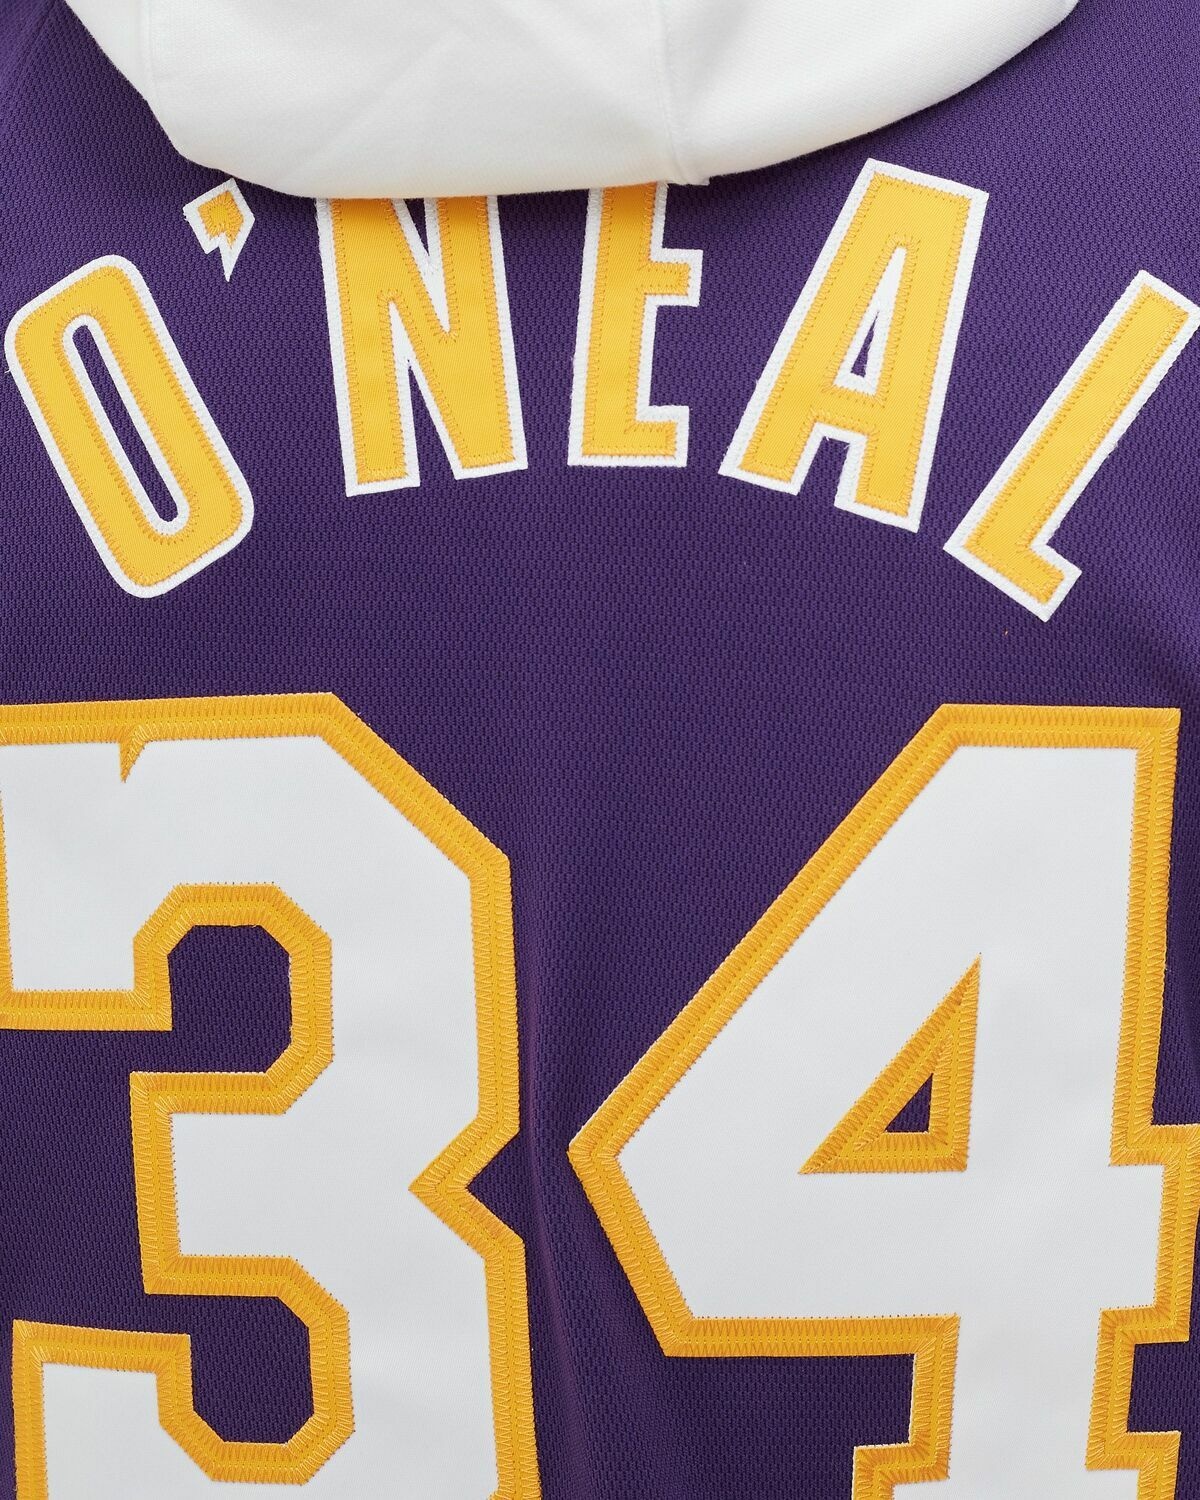 Mitchell & Ness Nba Authentic Finals Jersey Los Angeles Lakers 2001 02 Shaquille O'neal #34 Purple - Mens - Jerseys